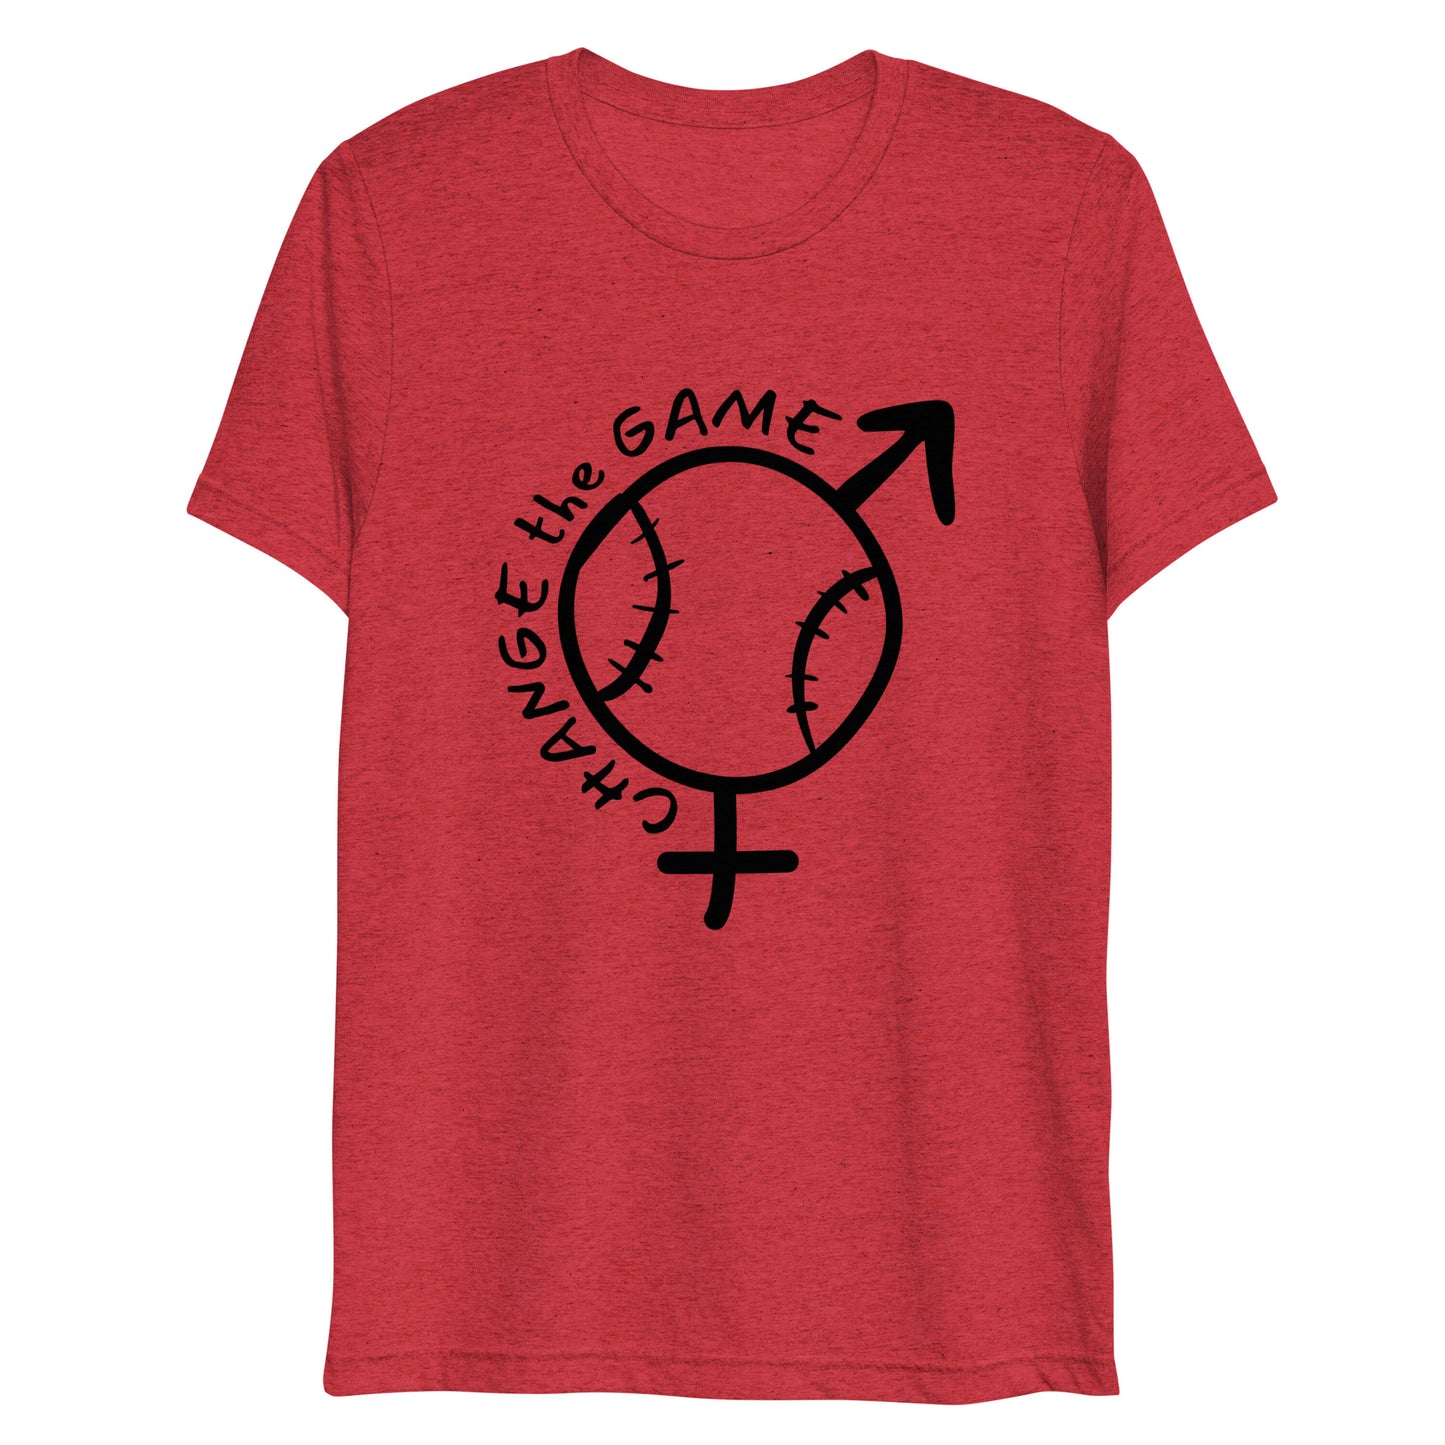 Change the Game - Unisex Tri-Blend Tee